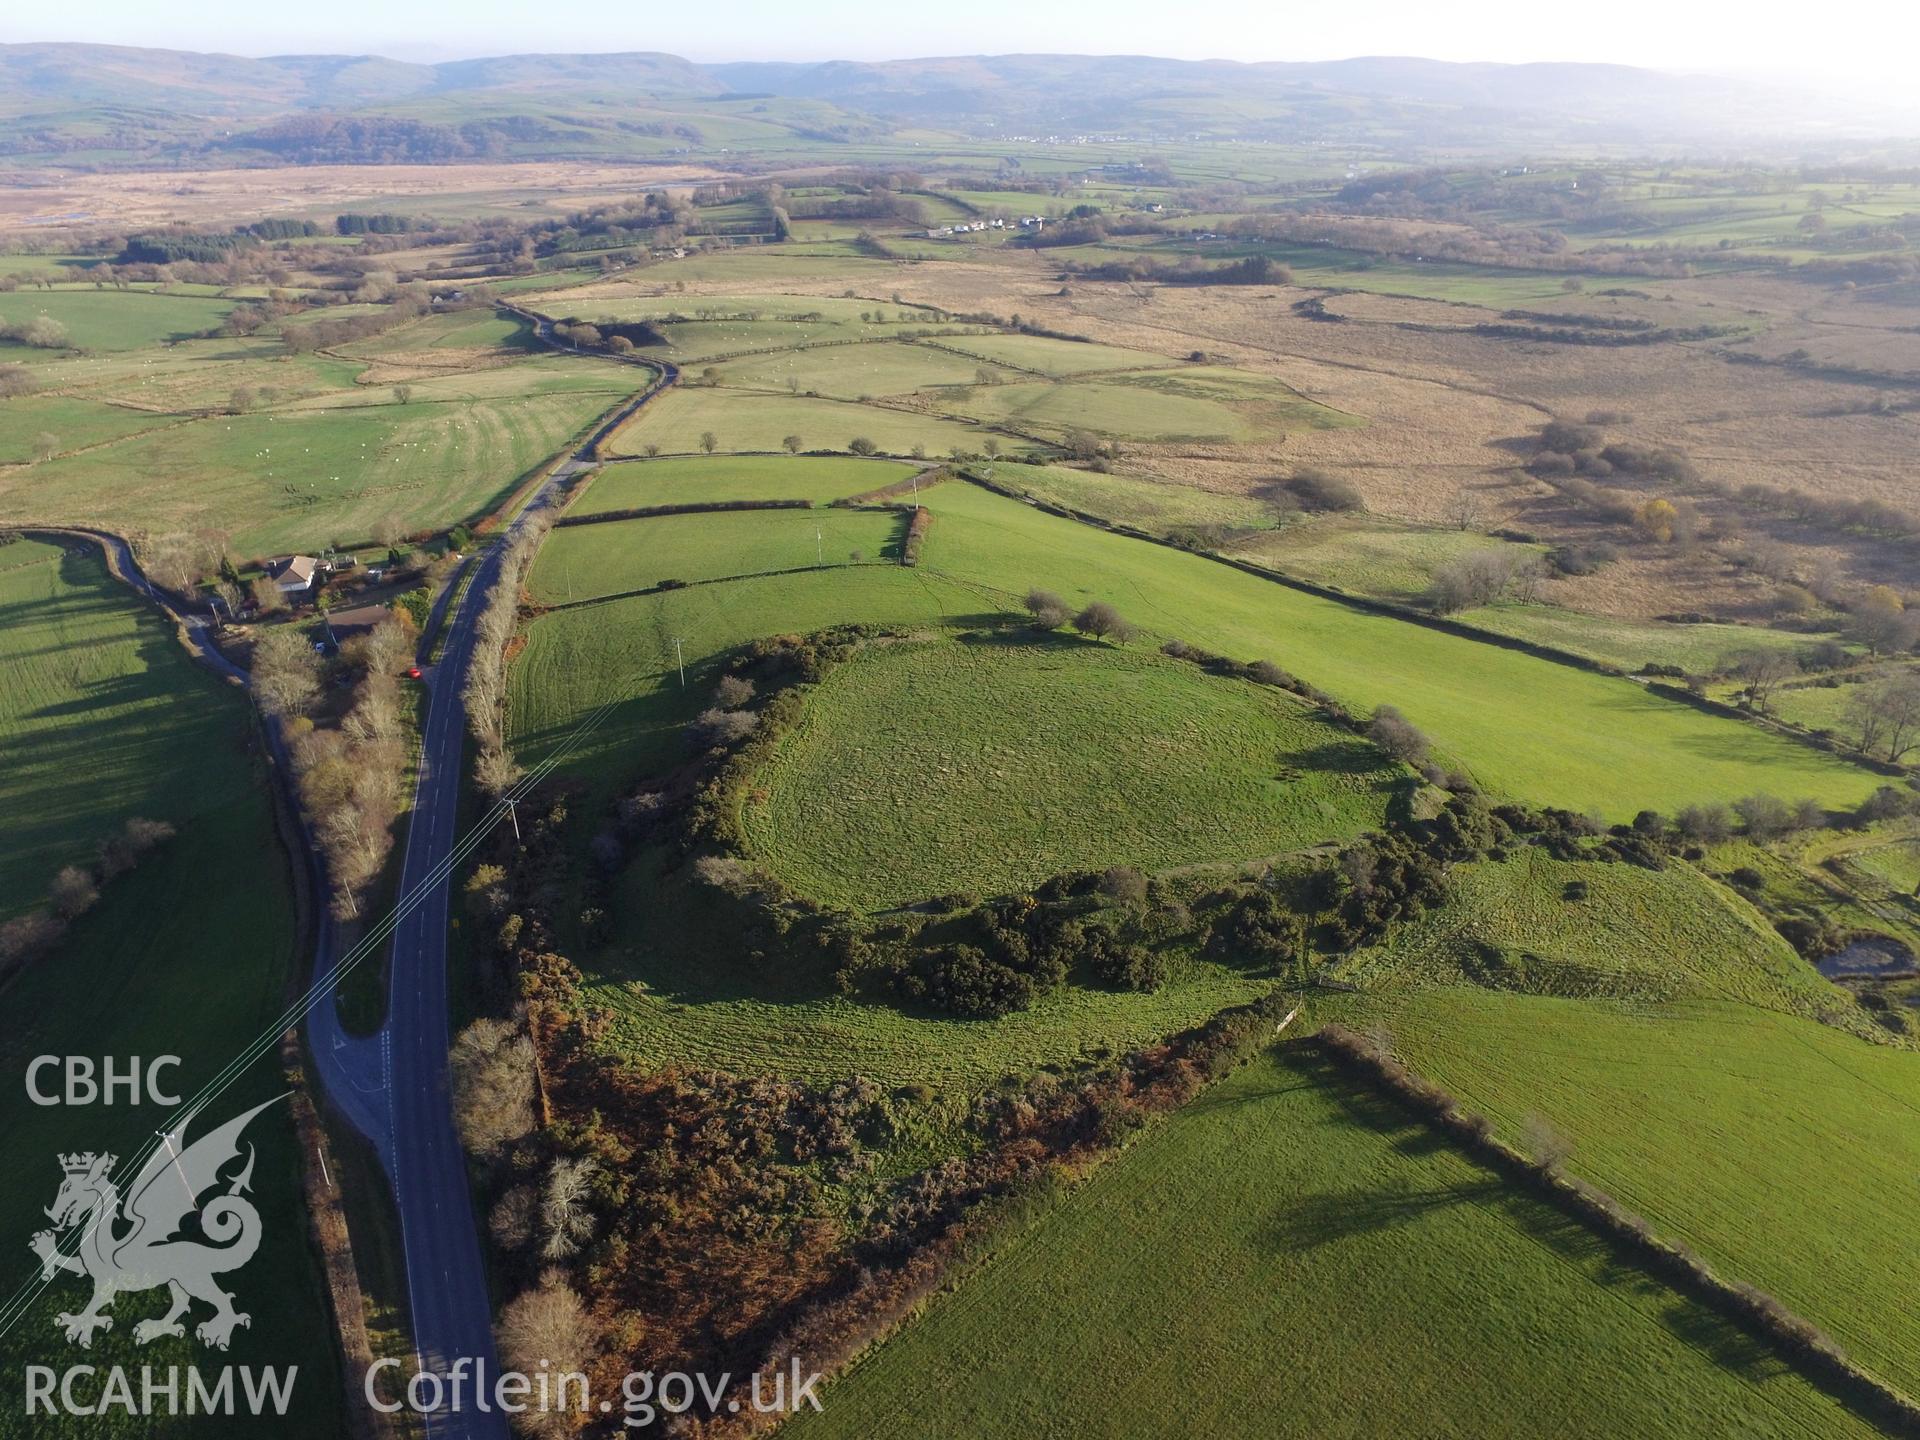 Aerial view from the north west of Castell Flemsih hillfort, Tregaron. Colour photograph taken by Paul R. Davis on 17th November 2018.